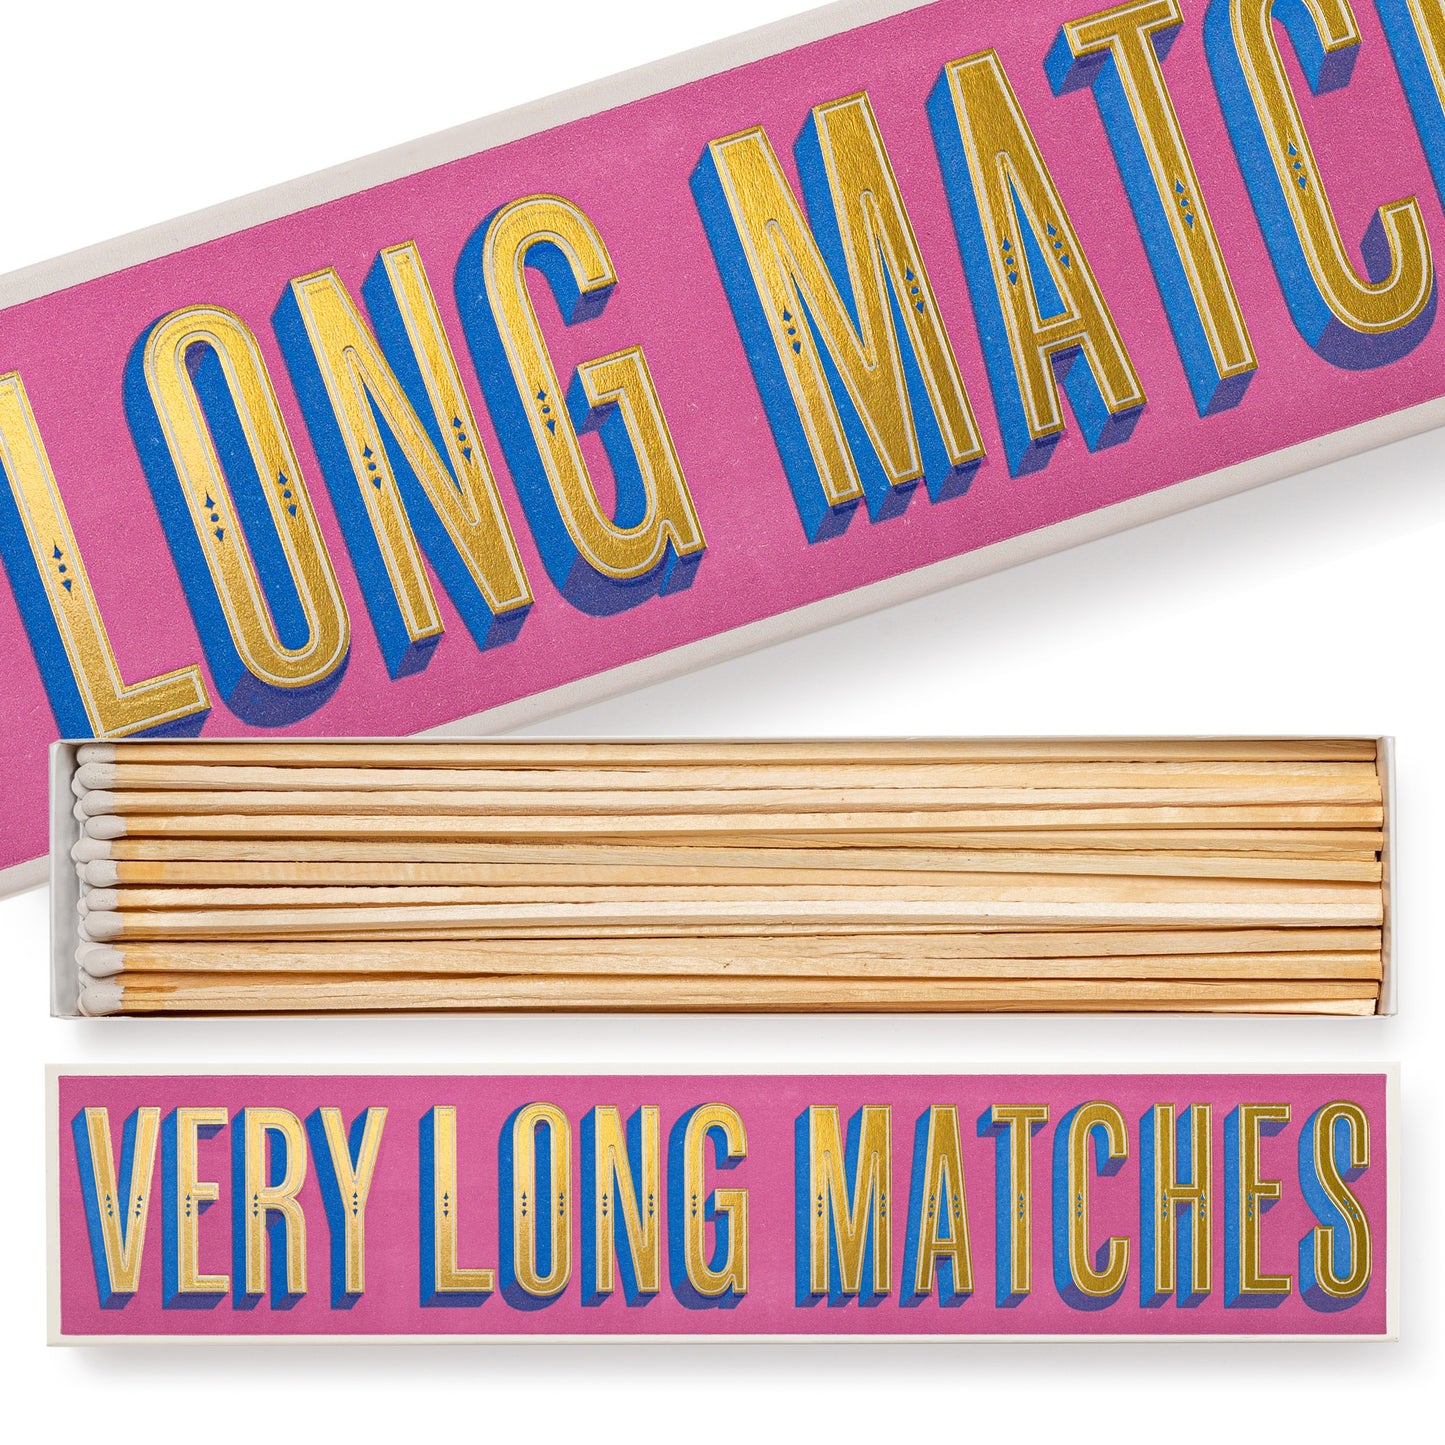 Extra Long 'Very Long' Matches